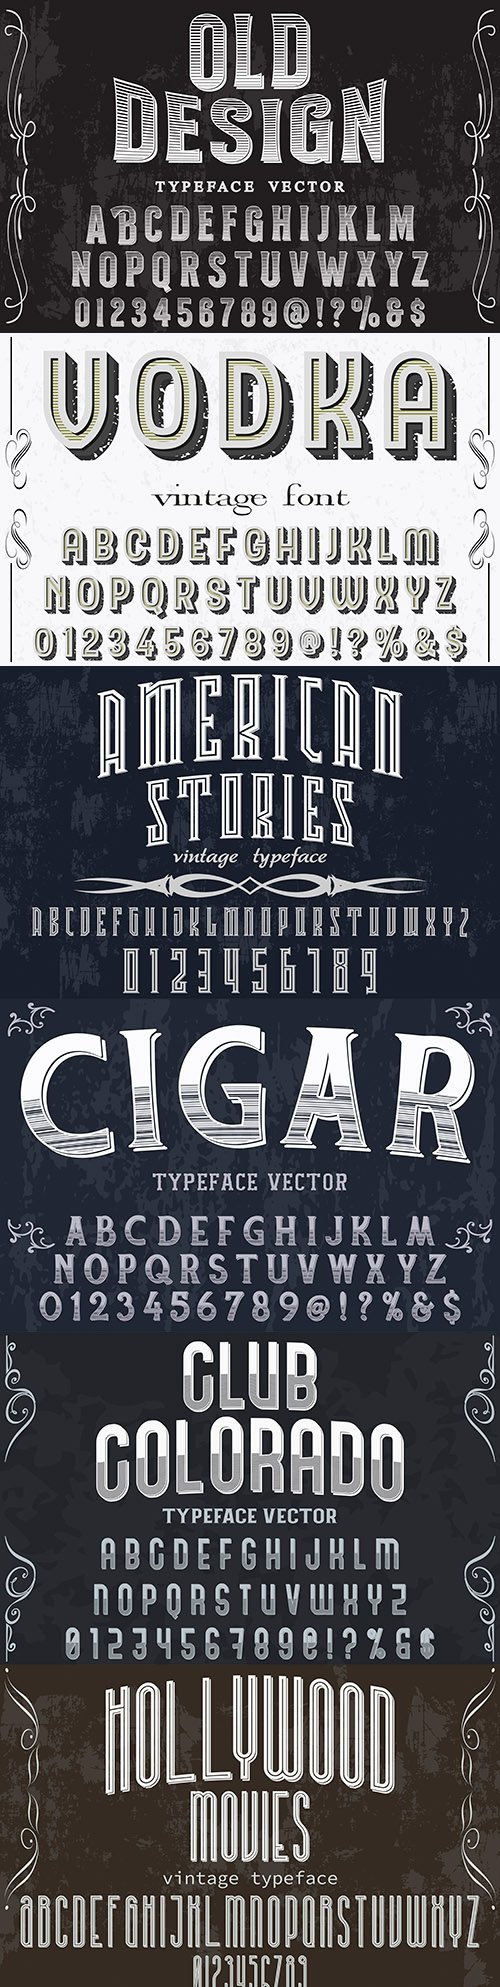 Editable font and alphabet collection illustration design